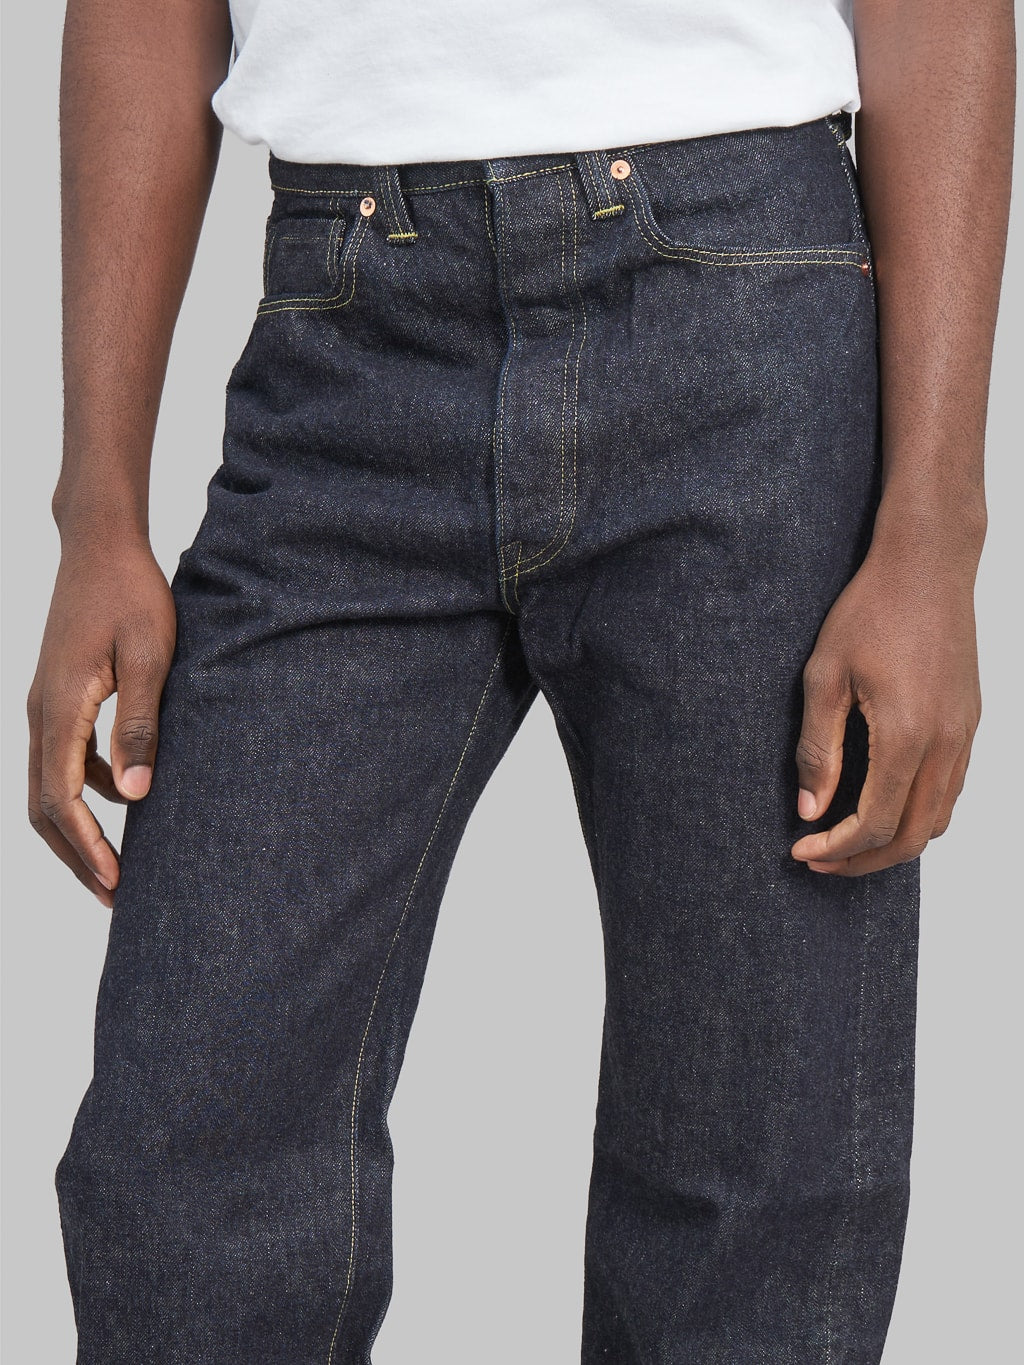 tcb s40s regular straight jeans front fit